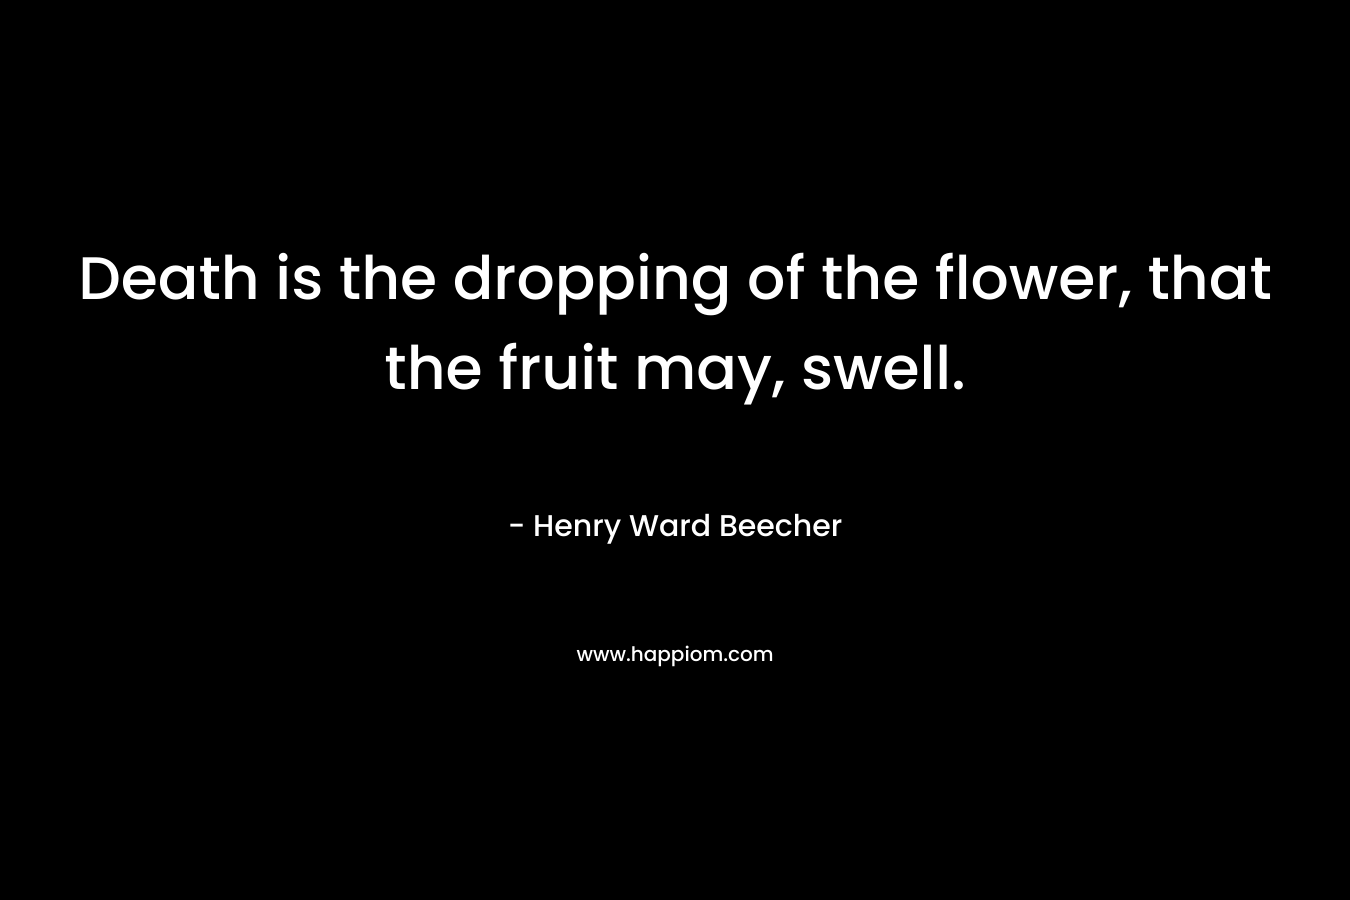 Death is the dropping of the flower, that the fruit may, swell. – Henry Ward Beecher